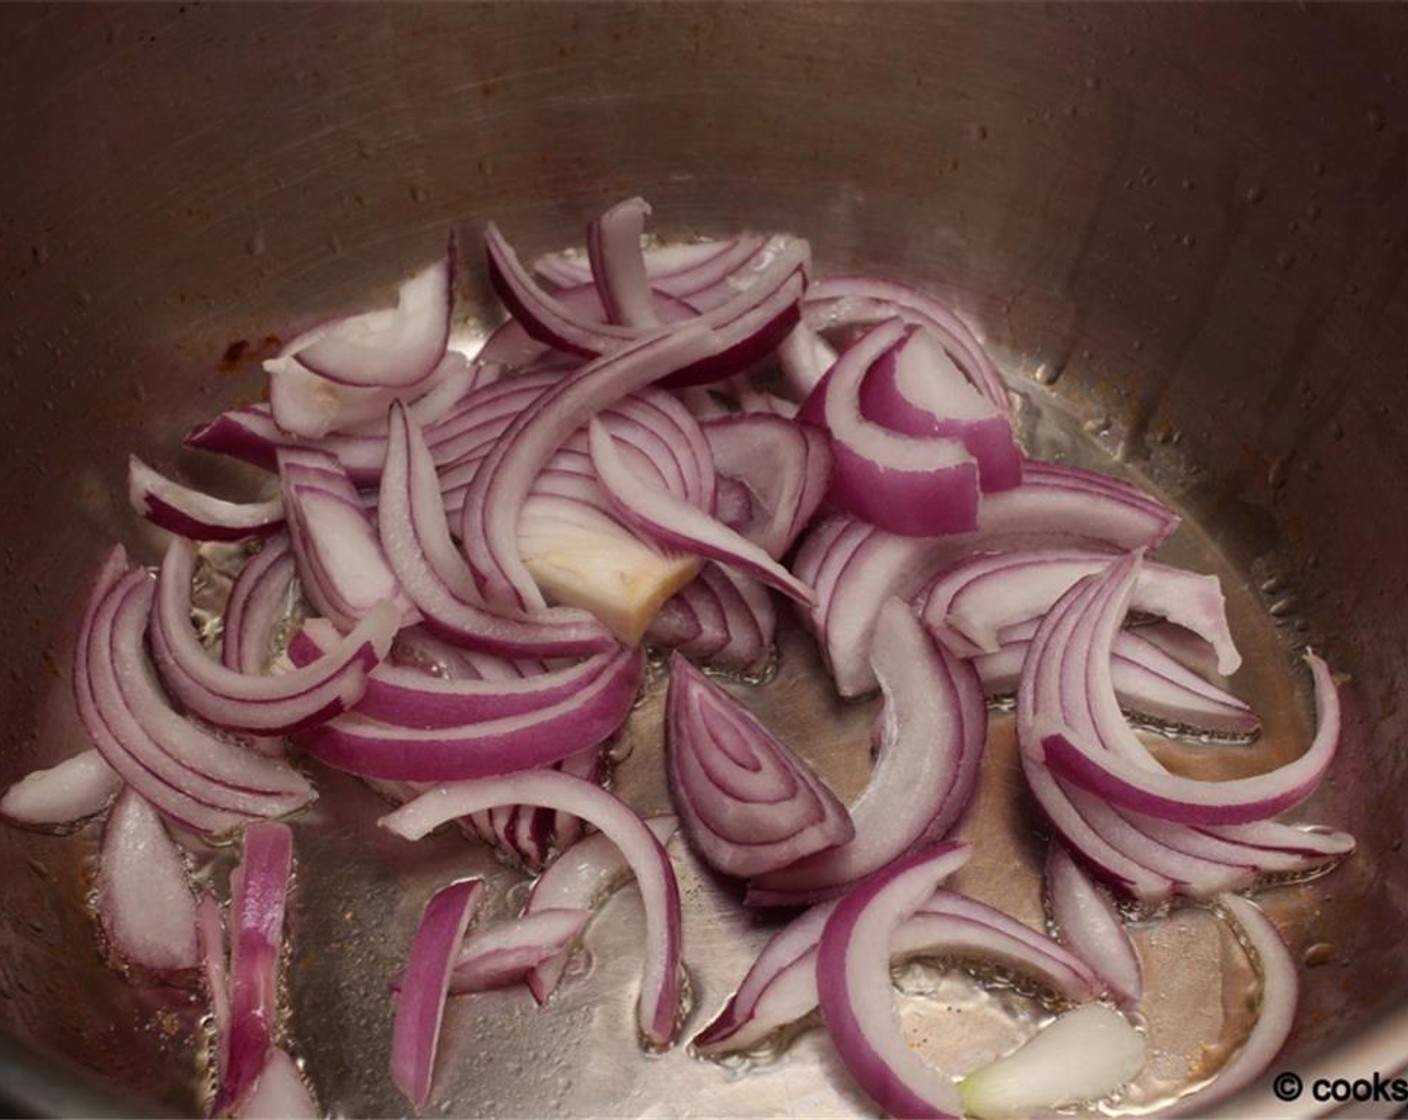 step 7 Heat the remaining Oil (1 1/2 Tbsp) and sauté onion (1/2 cup) until cooked.